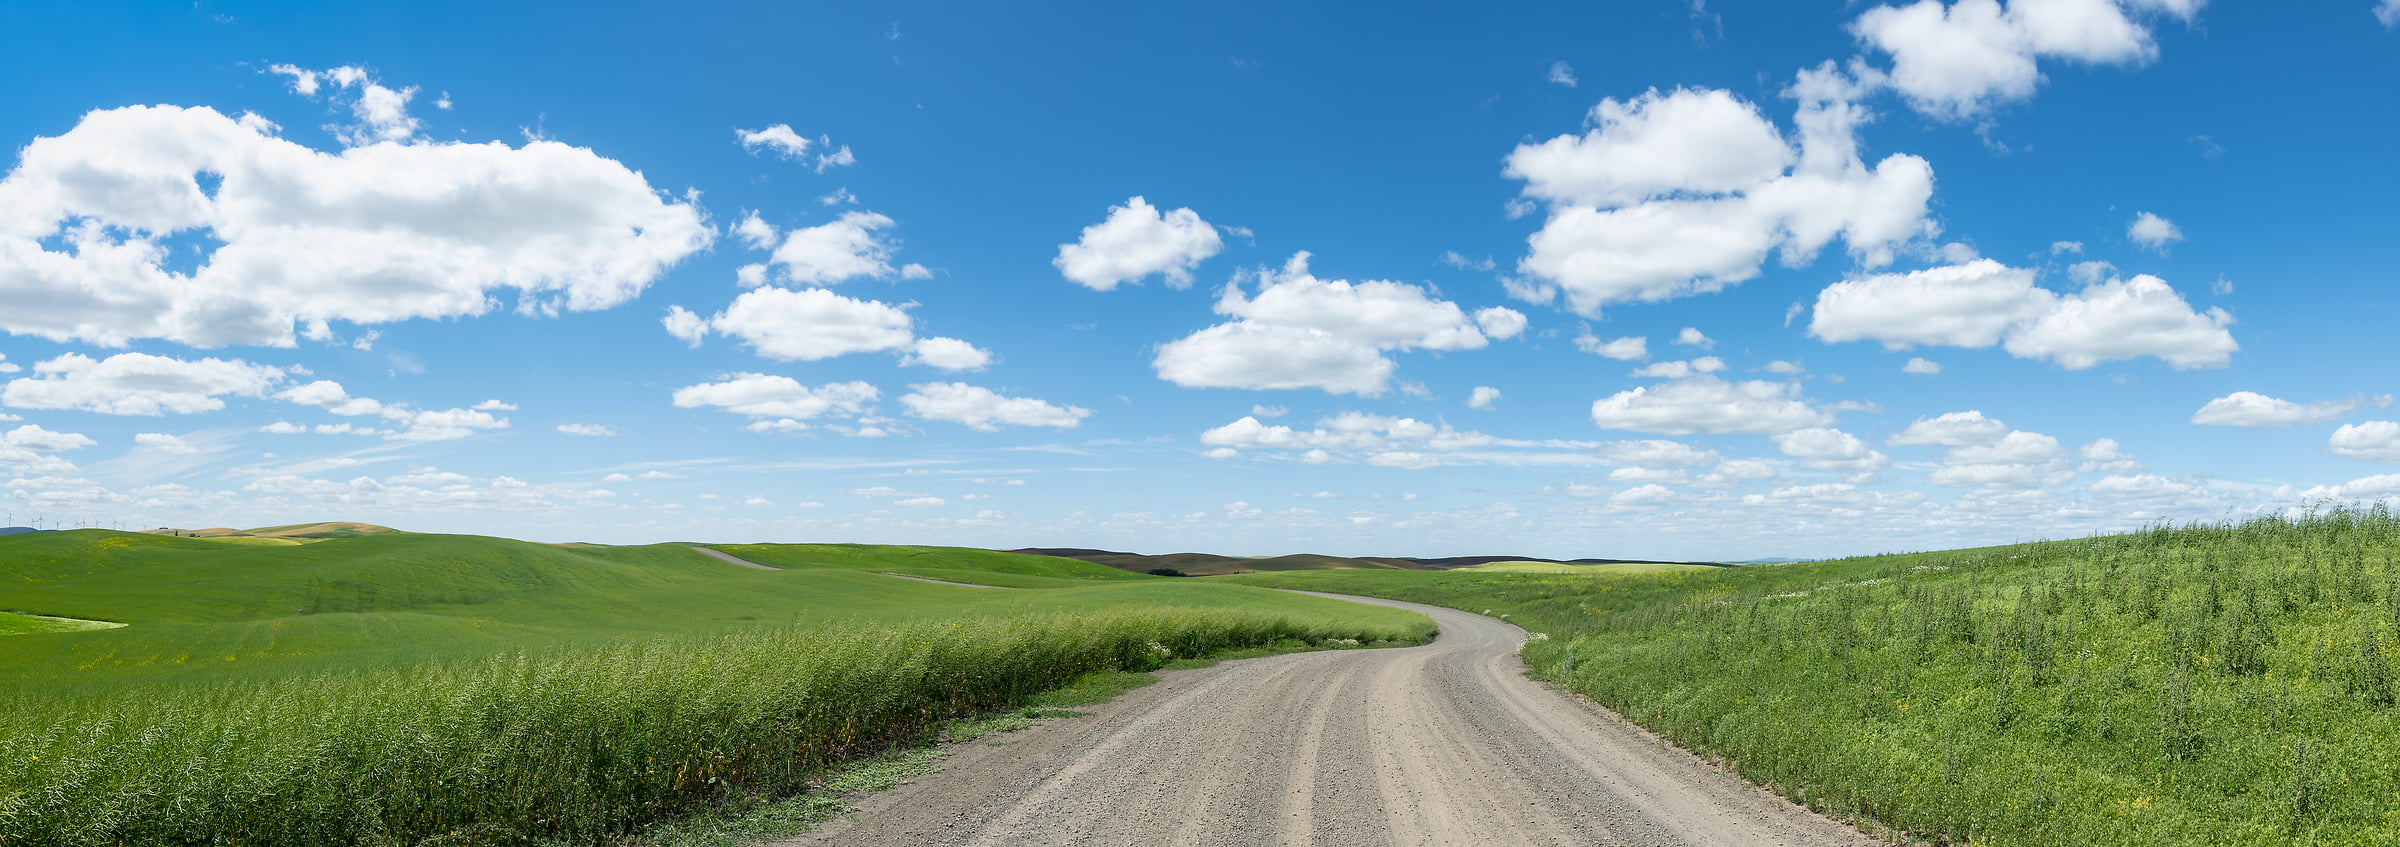 87 megapixels! A very high resolution, large-format VAST photo print of a road in farmland; landscape photograph created by Greg Probst in Palouse, Washington